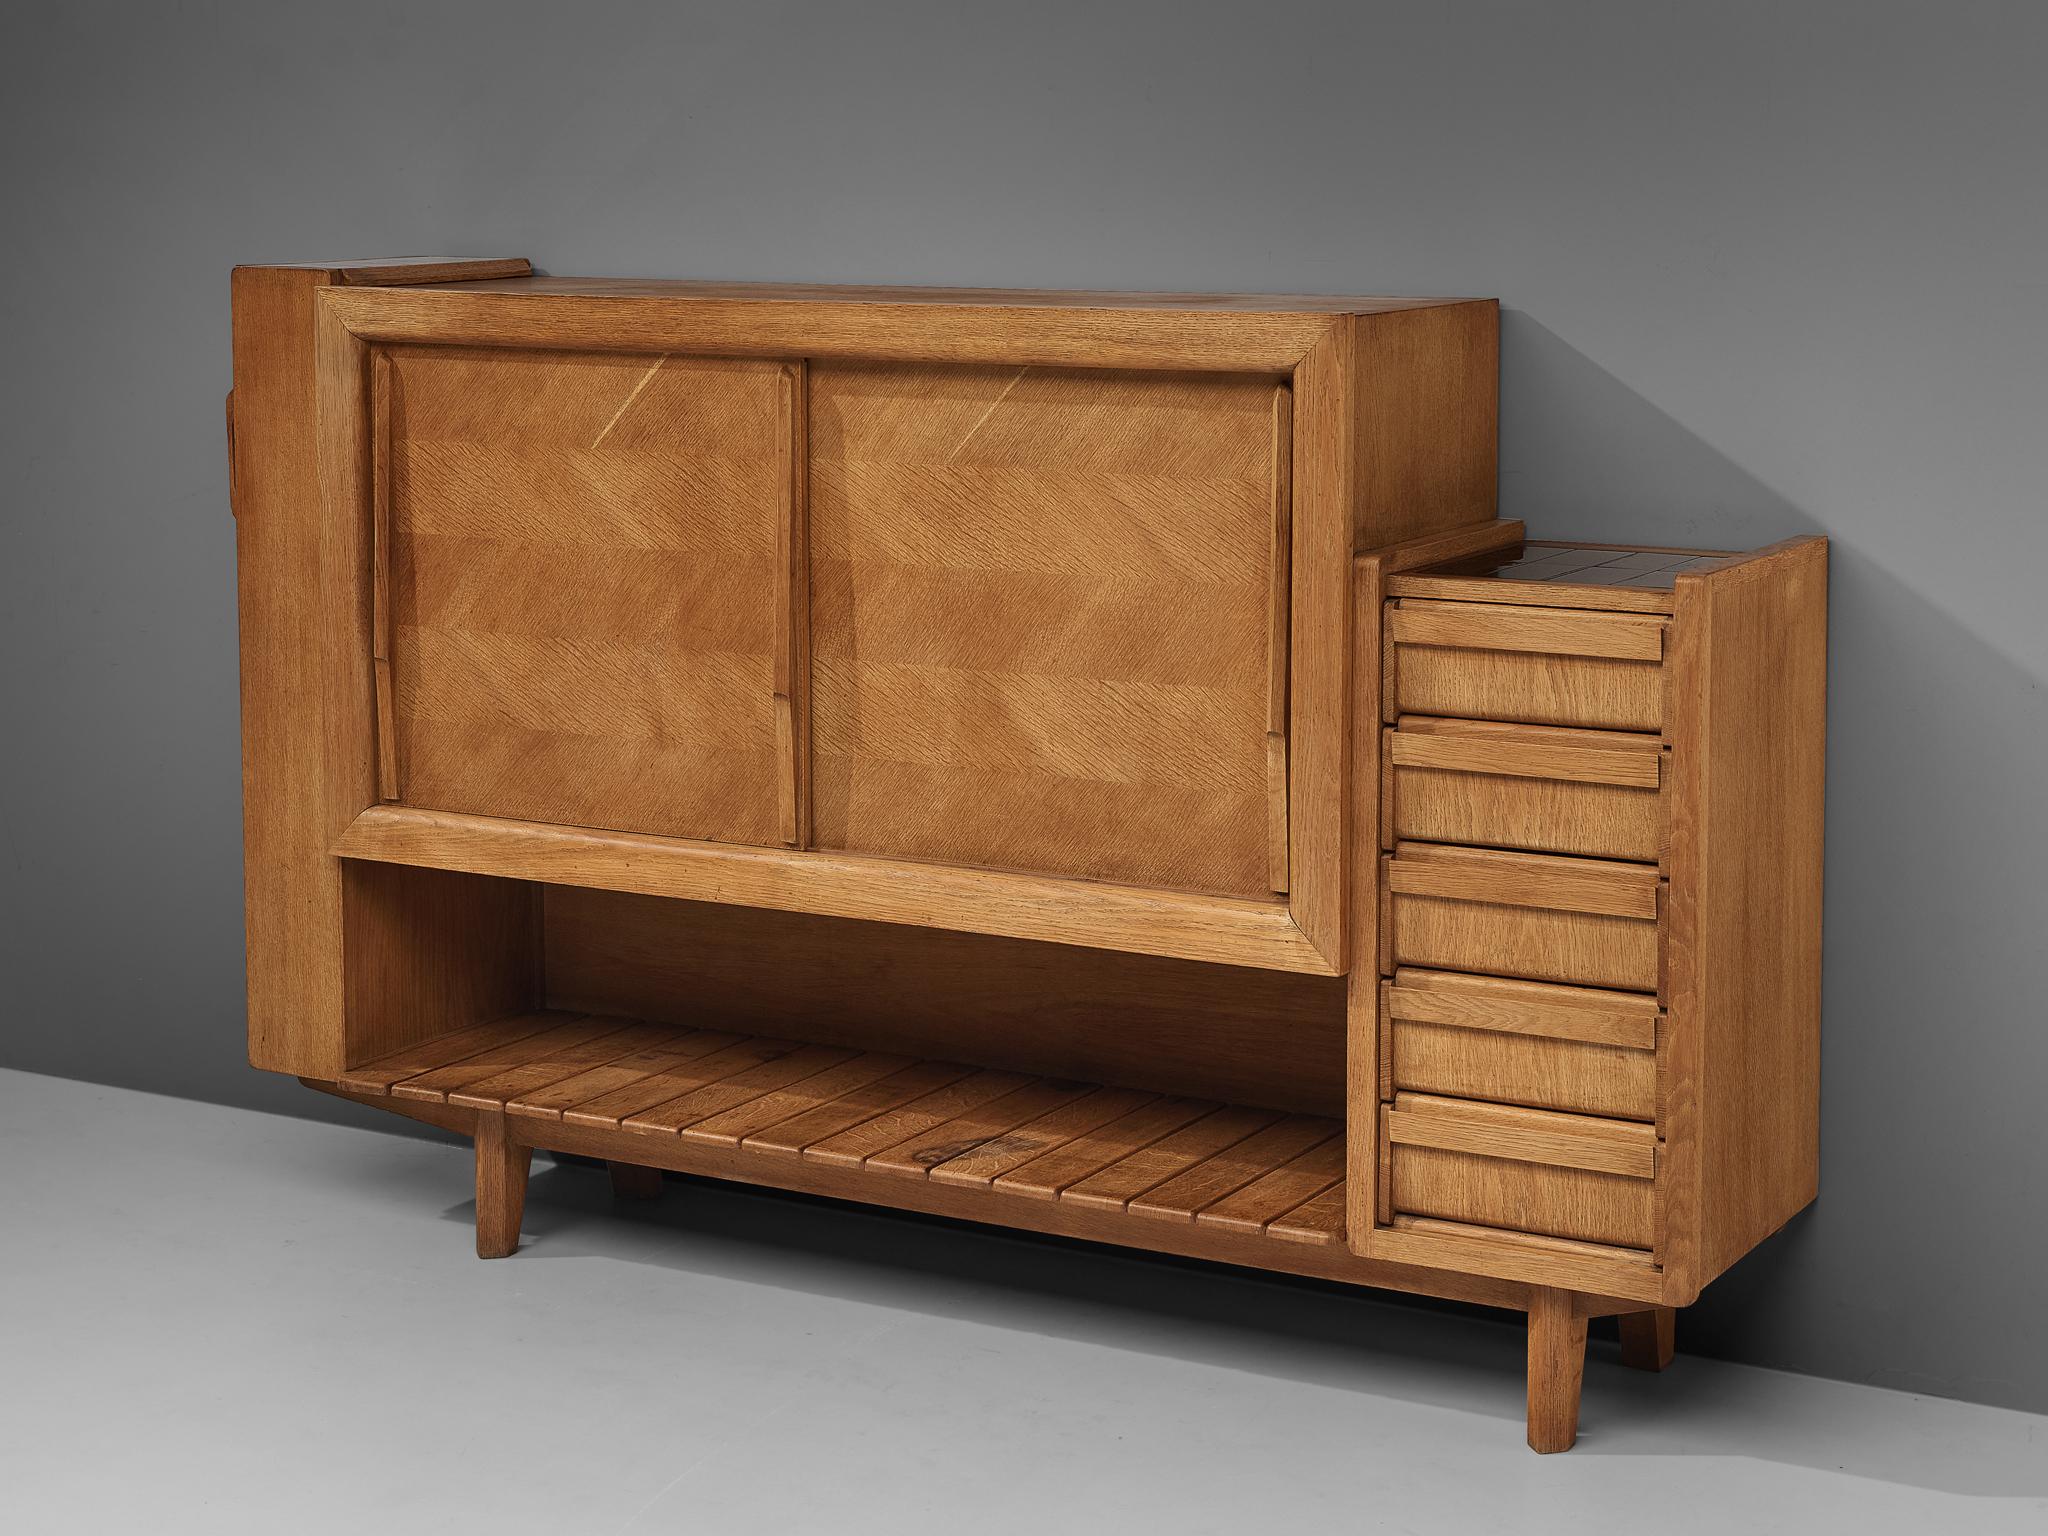 Guillerme et Chambron, sideboard, oak, ceramics, France, 1960s 

Functional credenza by Guillerme et Chambron with black ceramic tiles. This sideboard features four different storage compartments. A compartment with two sliding doors is places above